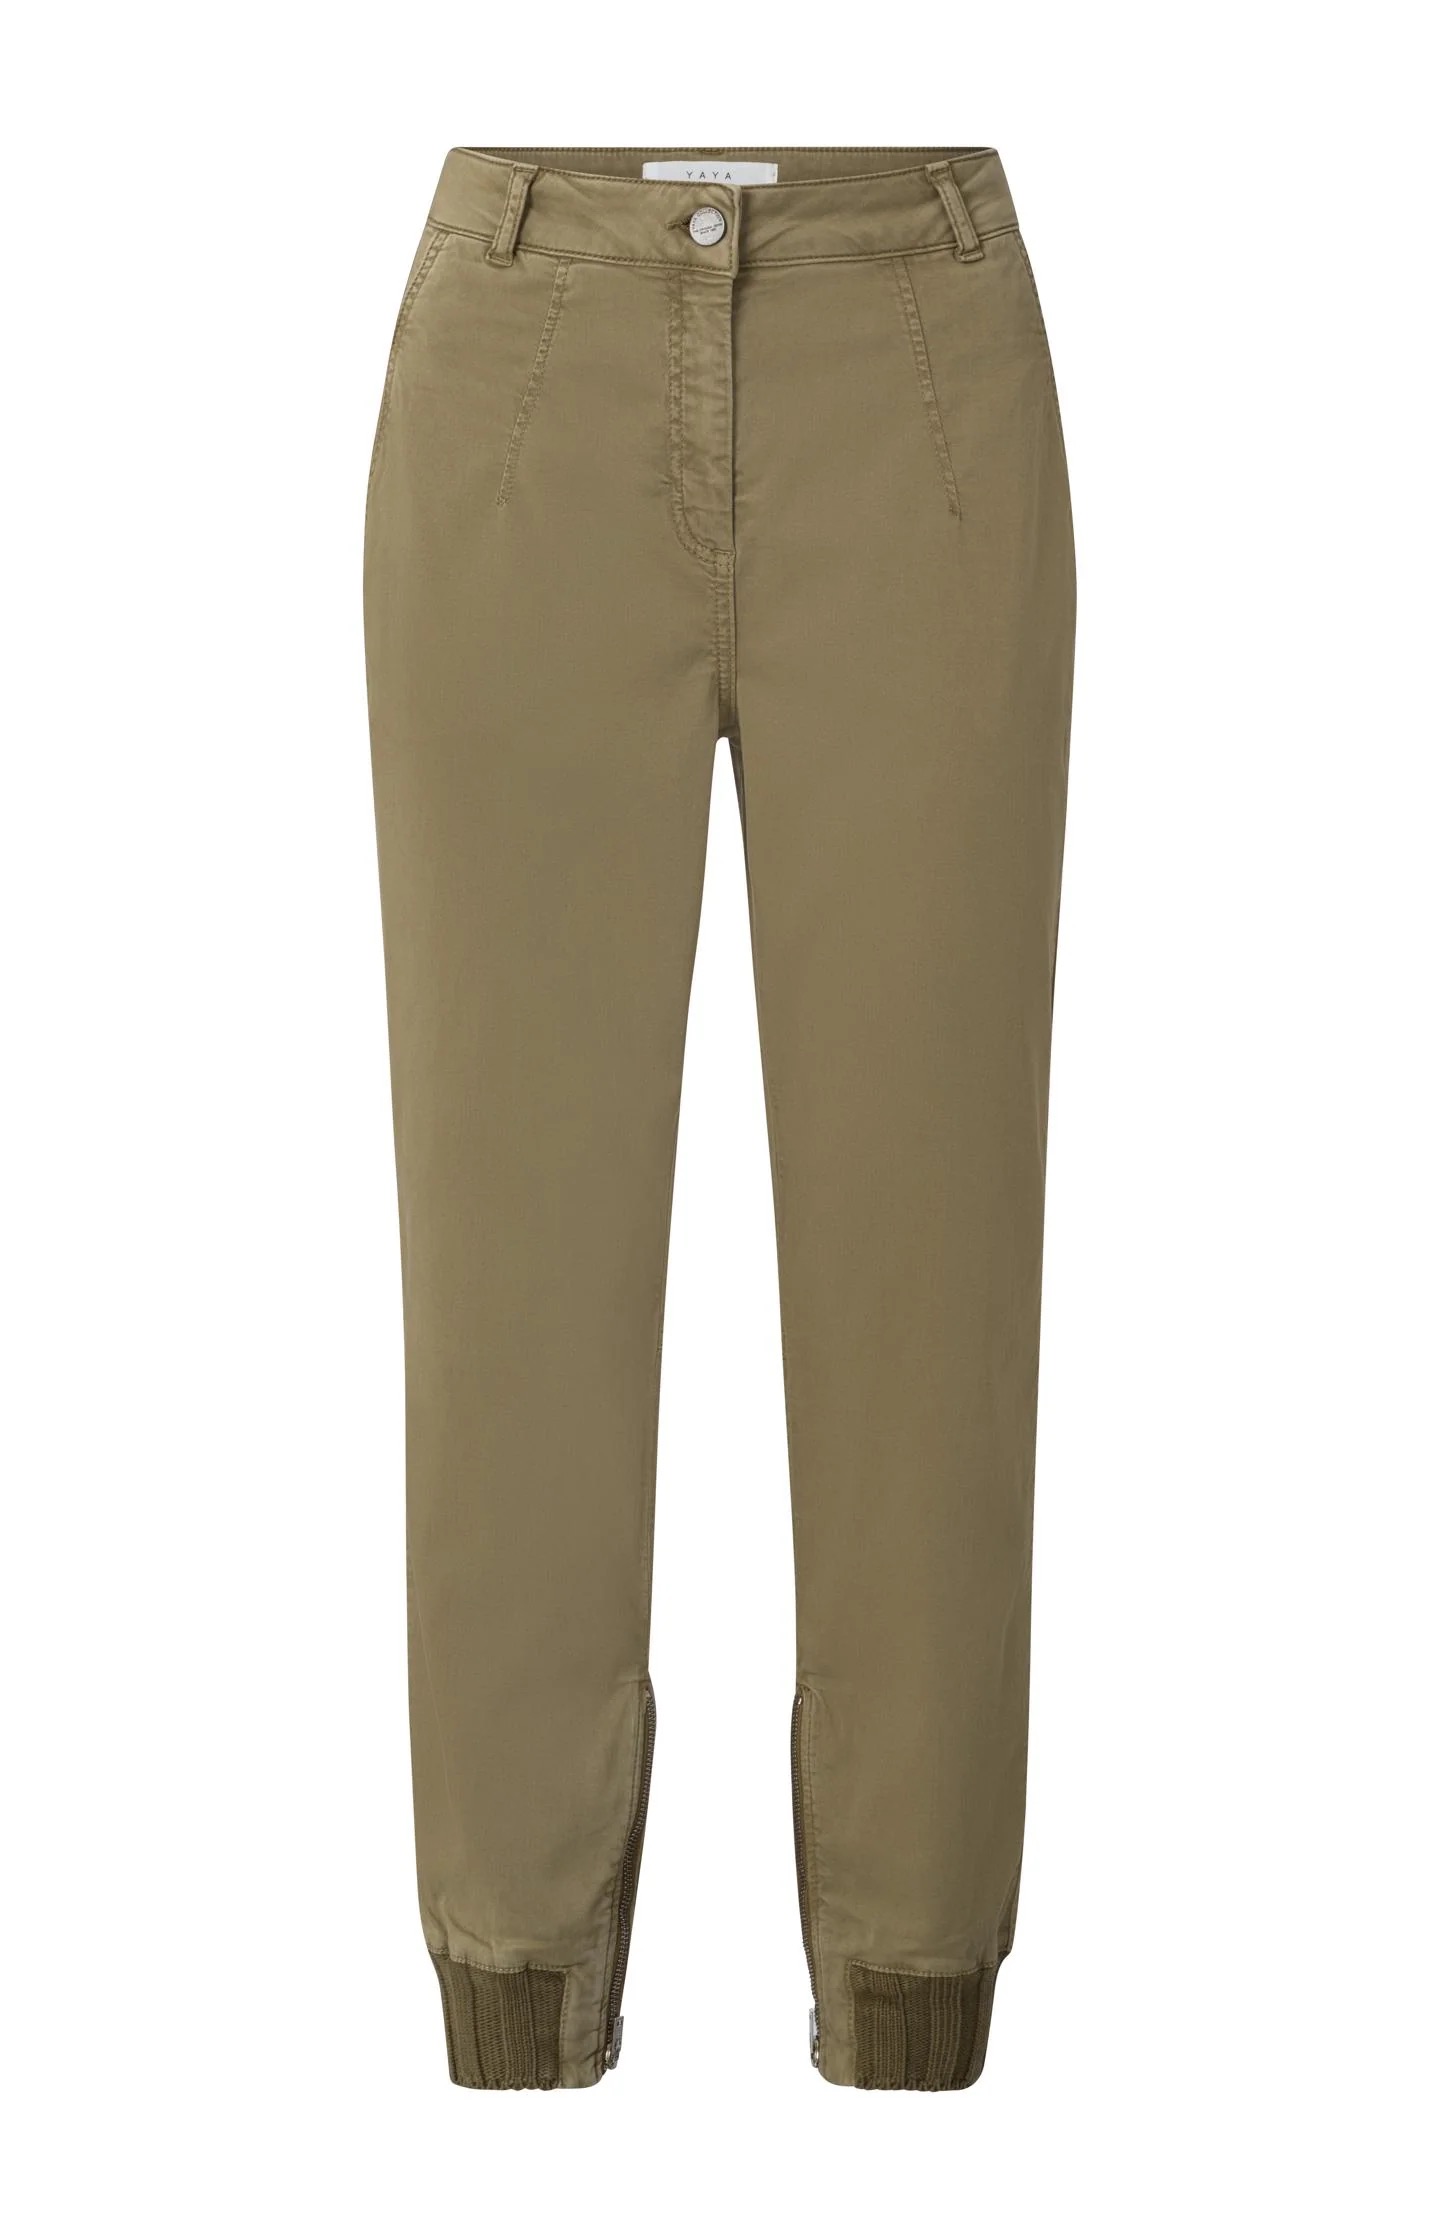 Soft cargo trousers with rib cuffs Gothic Olive Green - Harrison